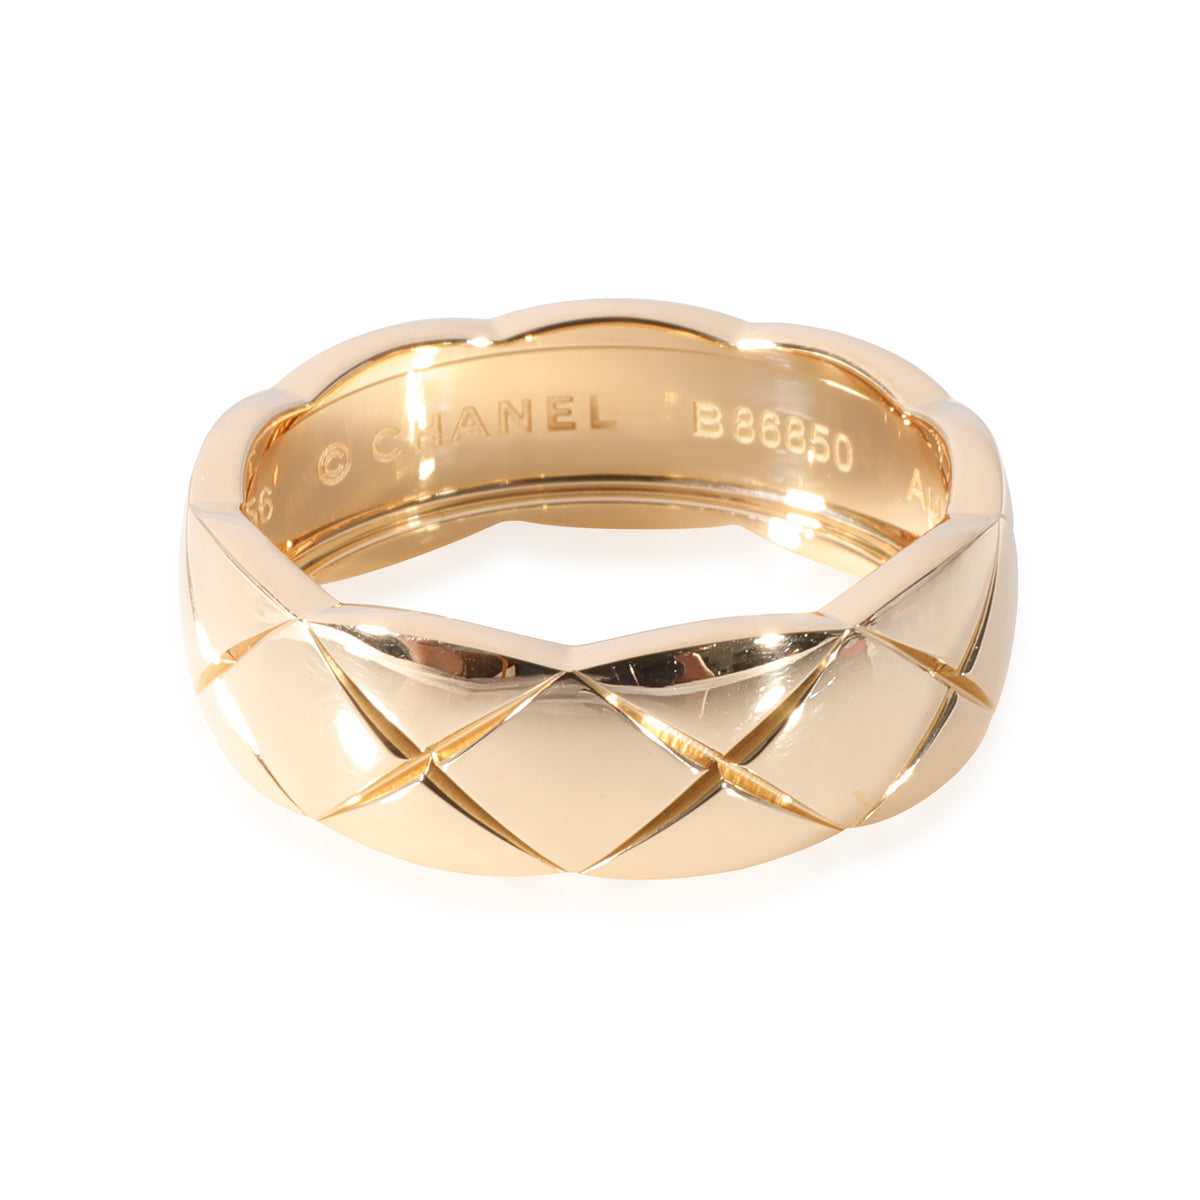 Chanel - Authenticated Coco Crush Ring - Yellow Gold Black for Women, Very Good Condition